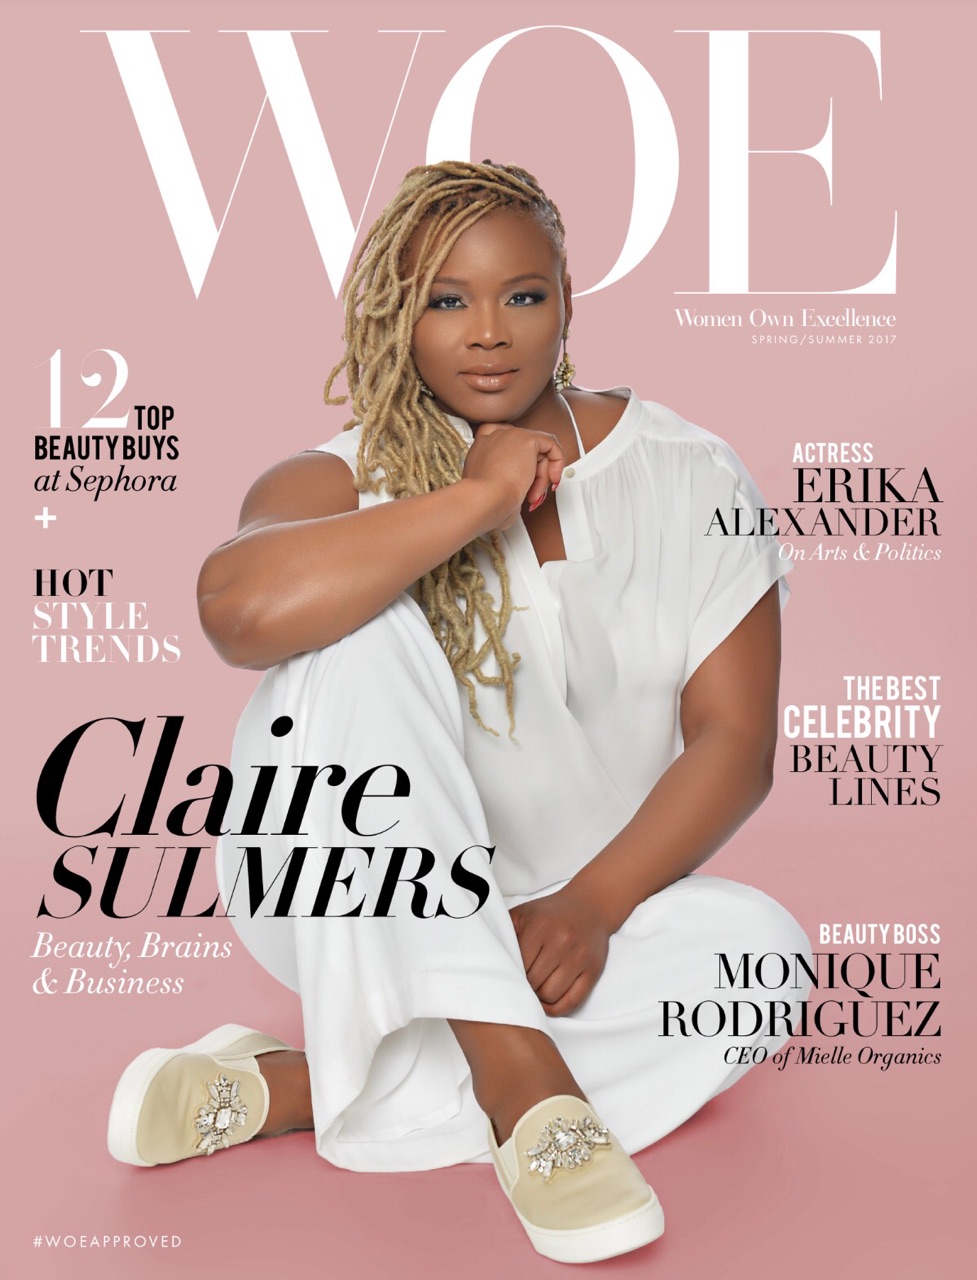 00-woe-magazine-conversations-with-claire-sulmers-fashion-bomb-daily